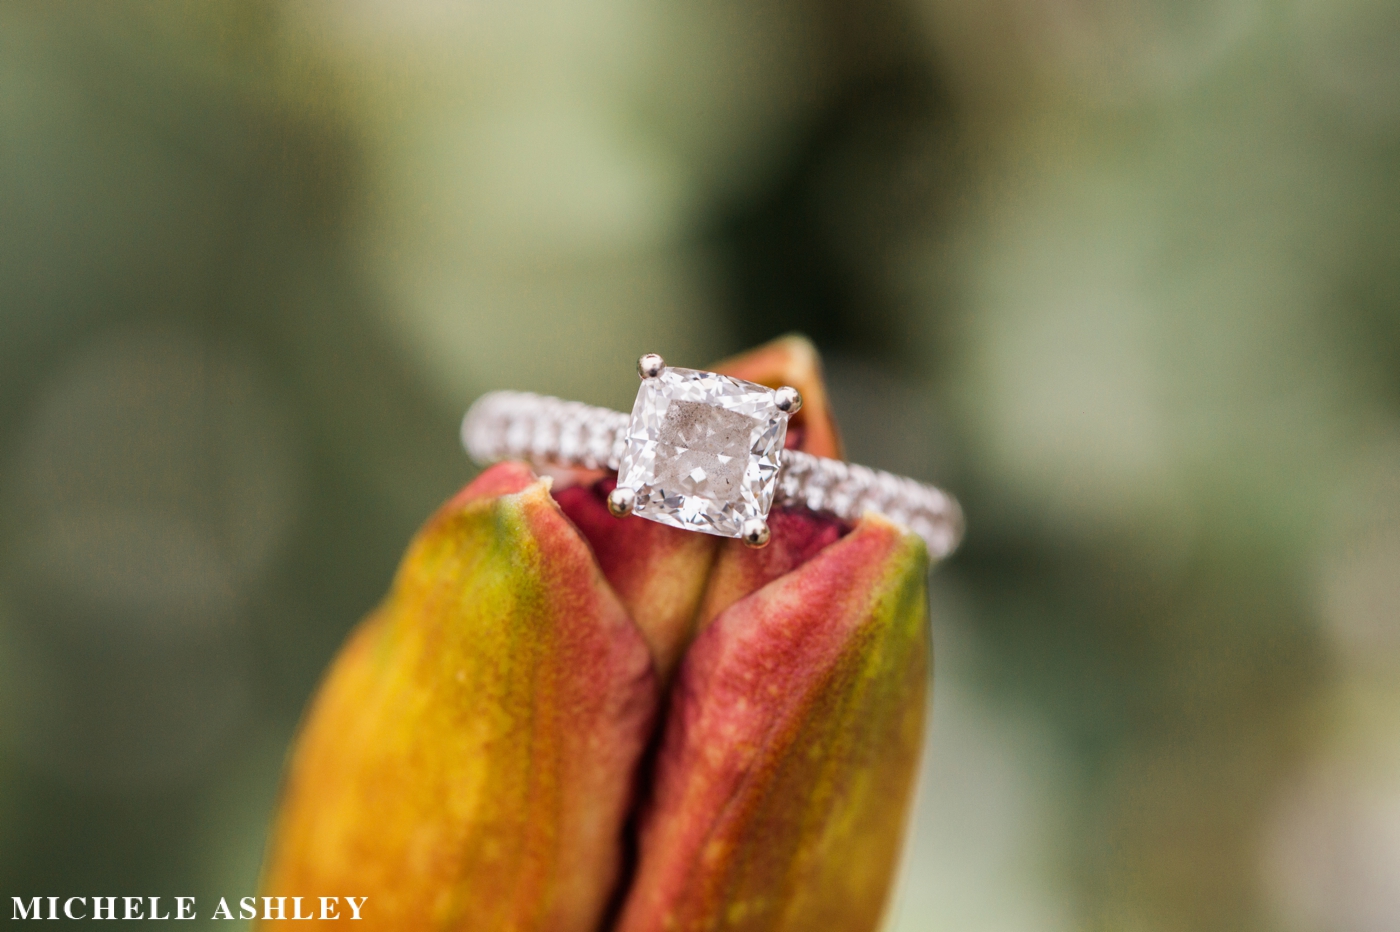 How to photograph engagement rings